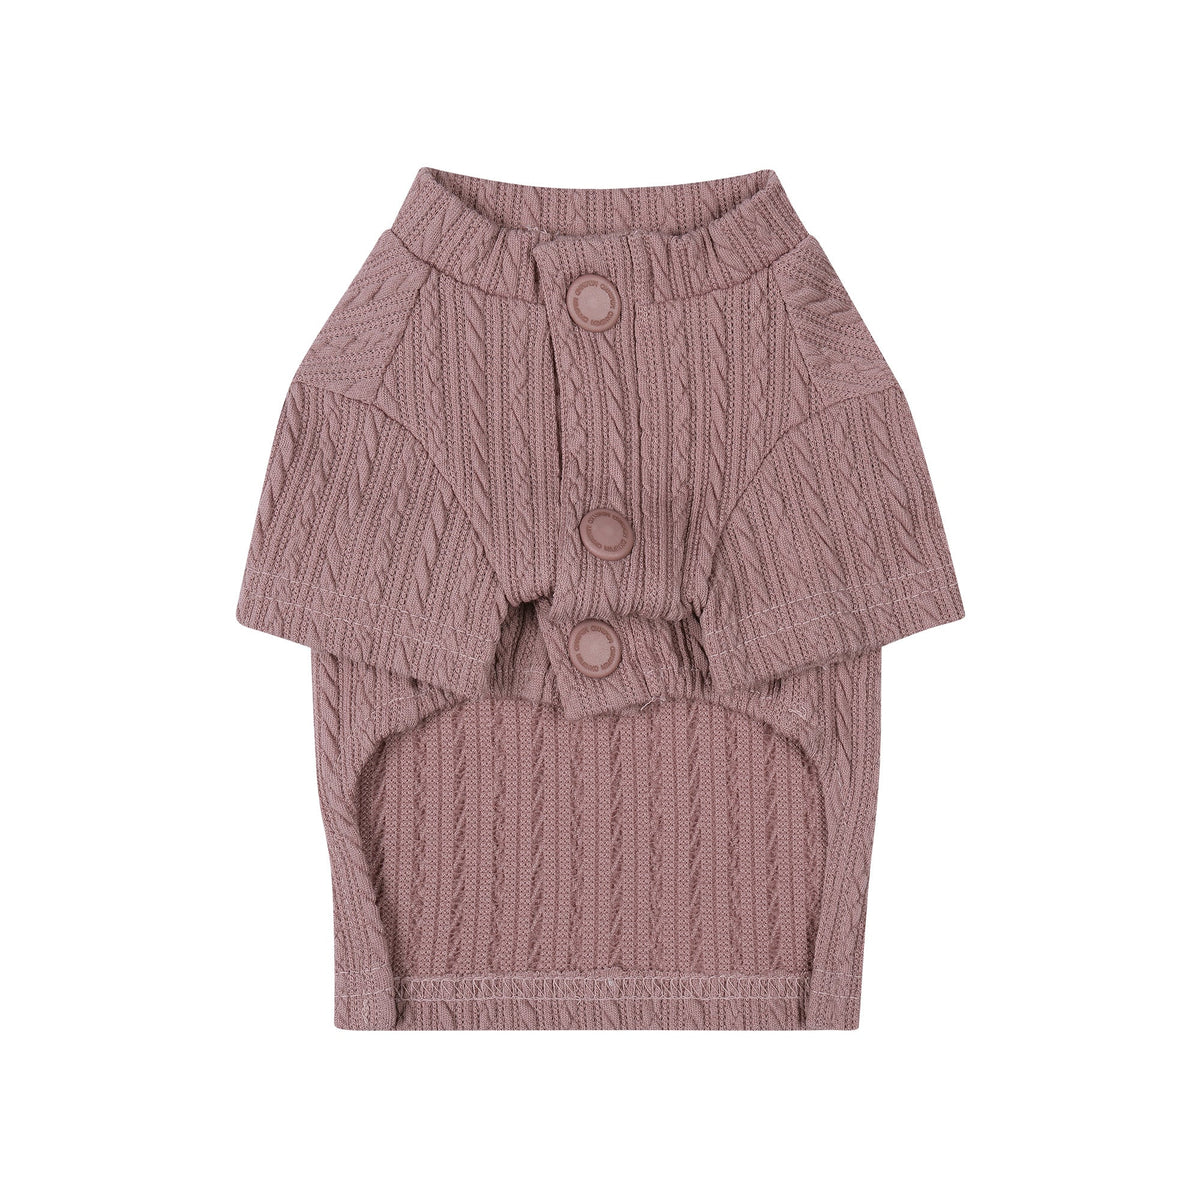 Sweater Weather Top - Pink